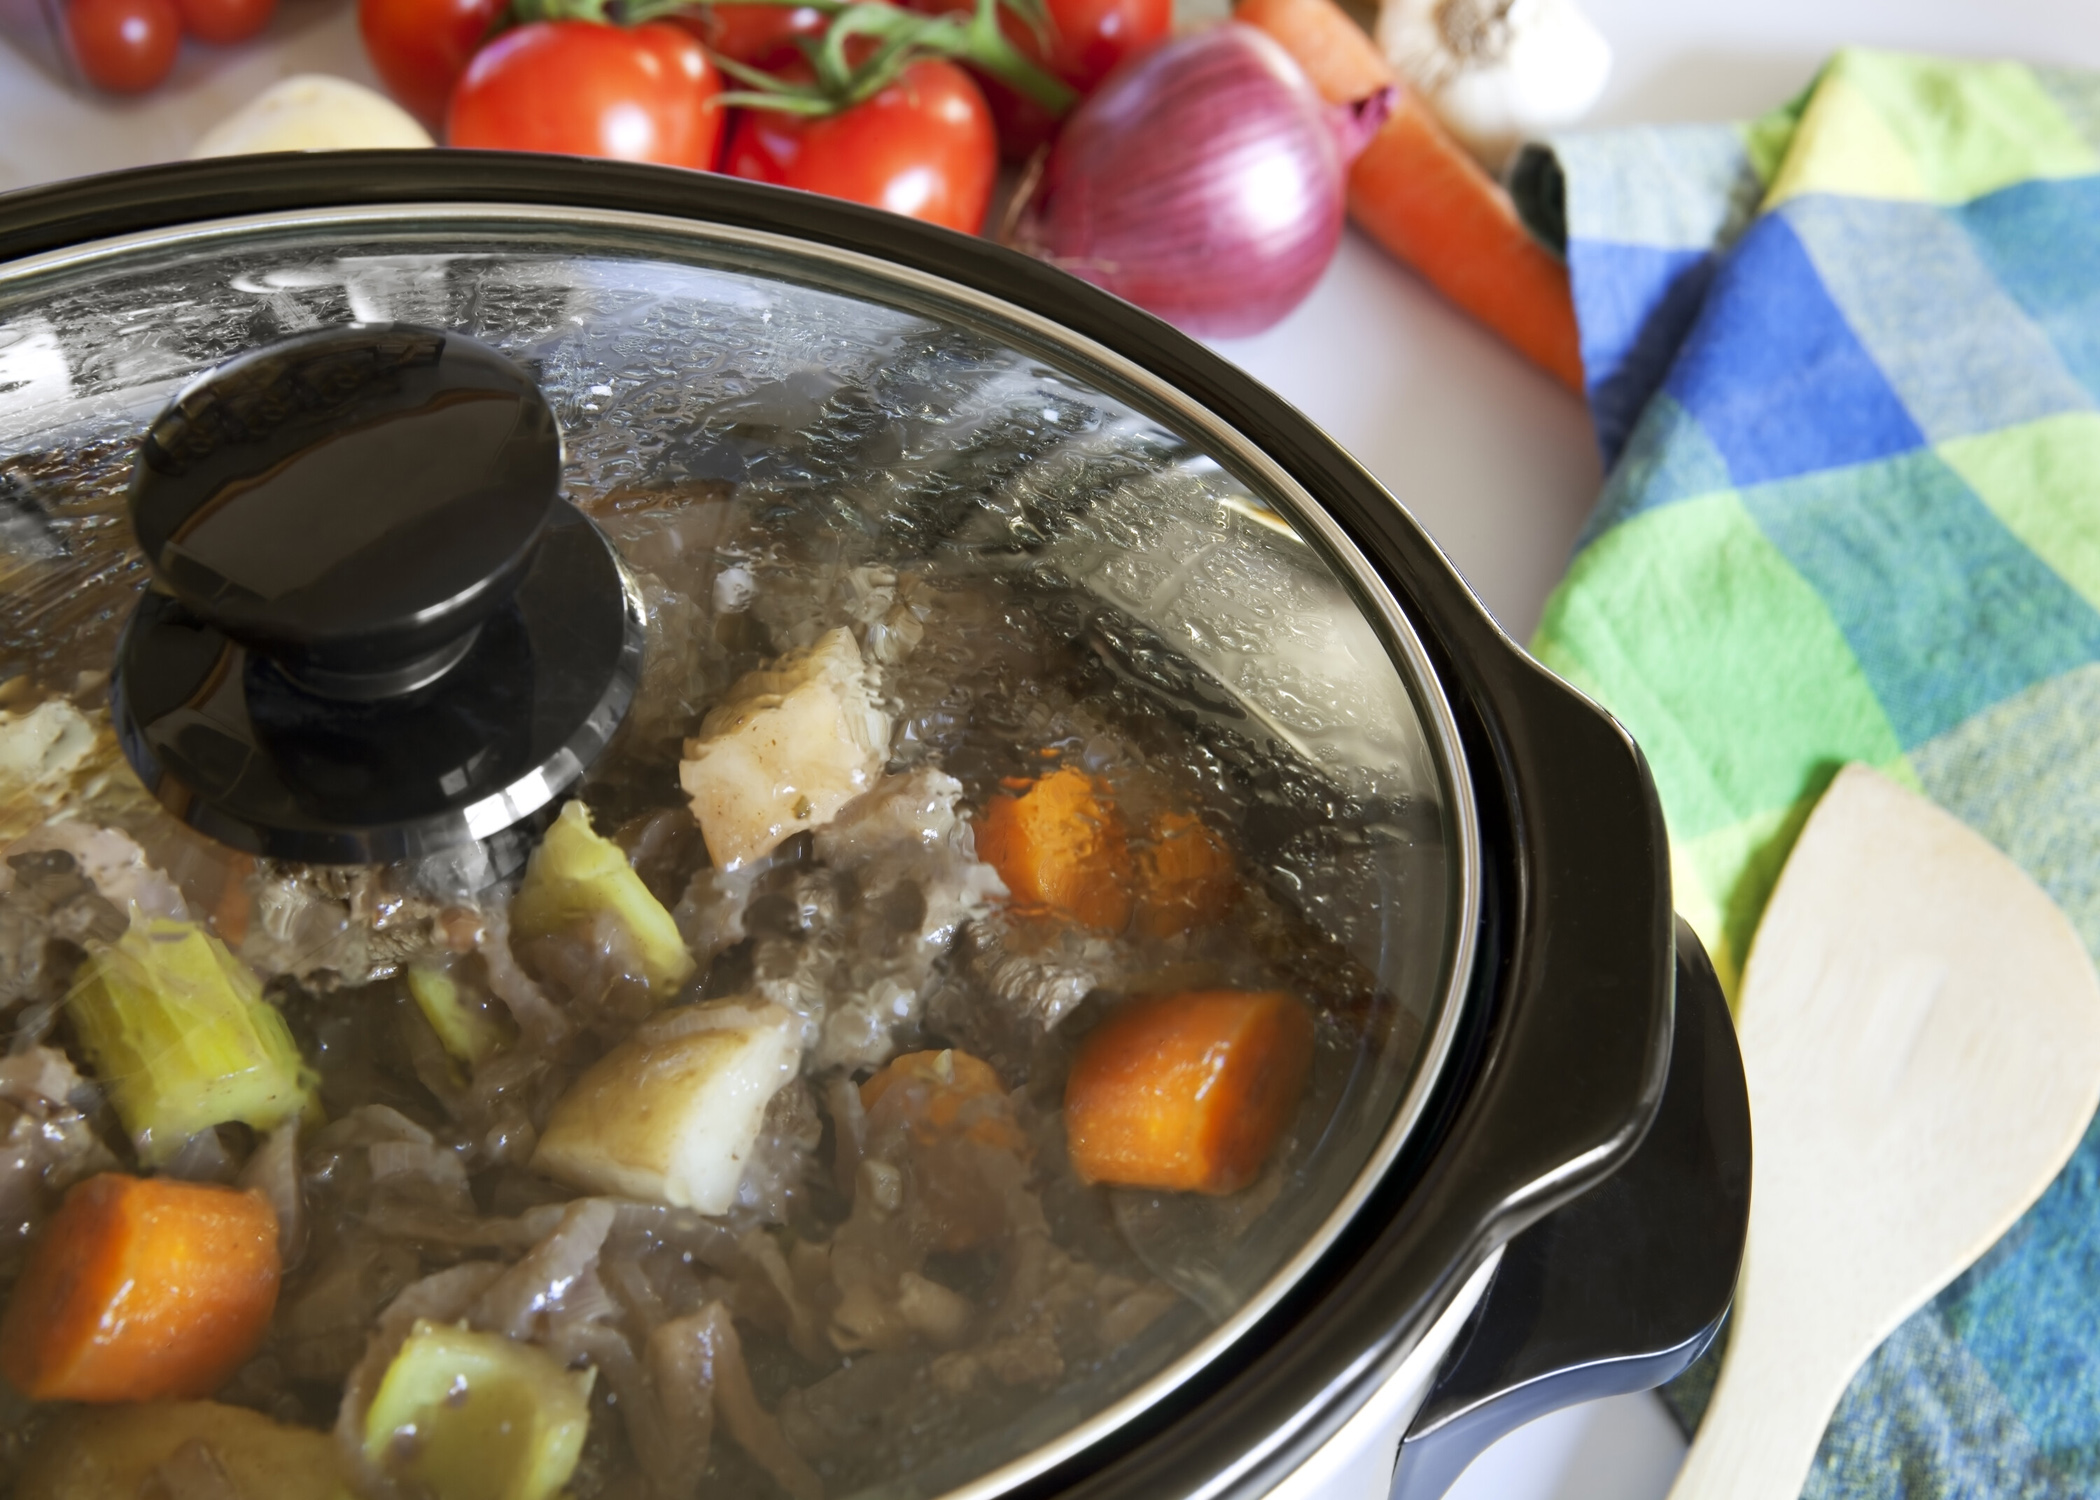 The 5 Safety Rules of Slow Cookers